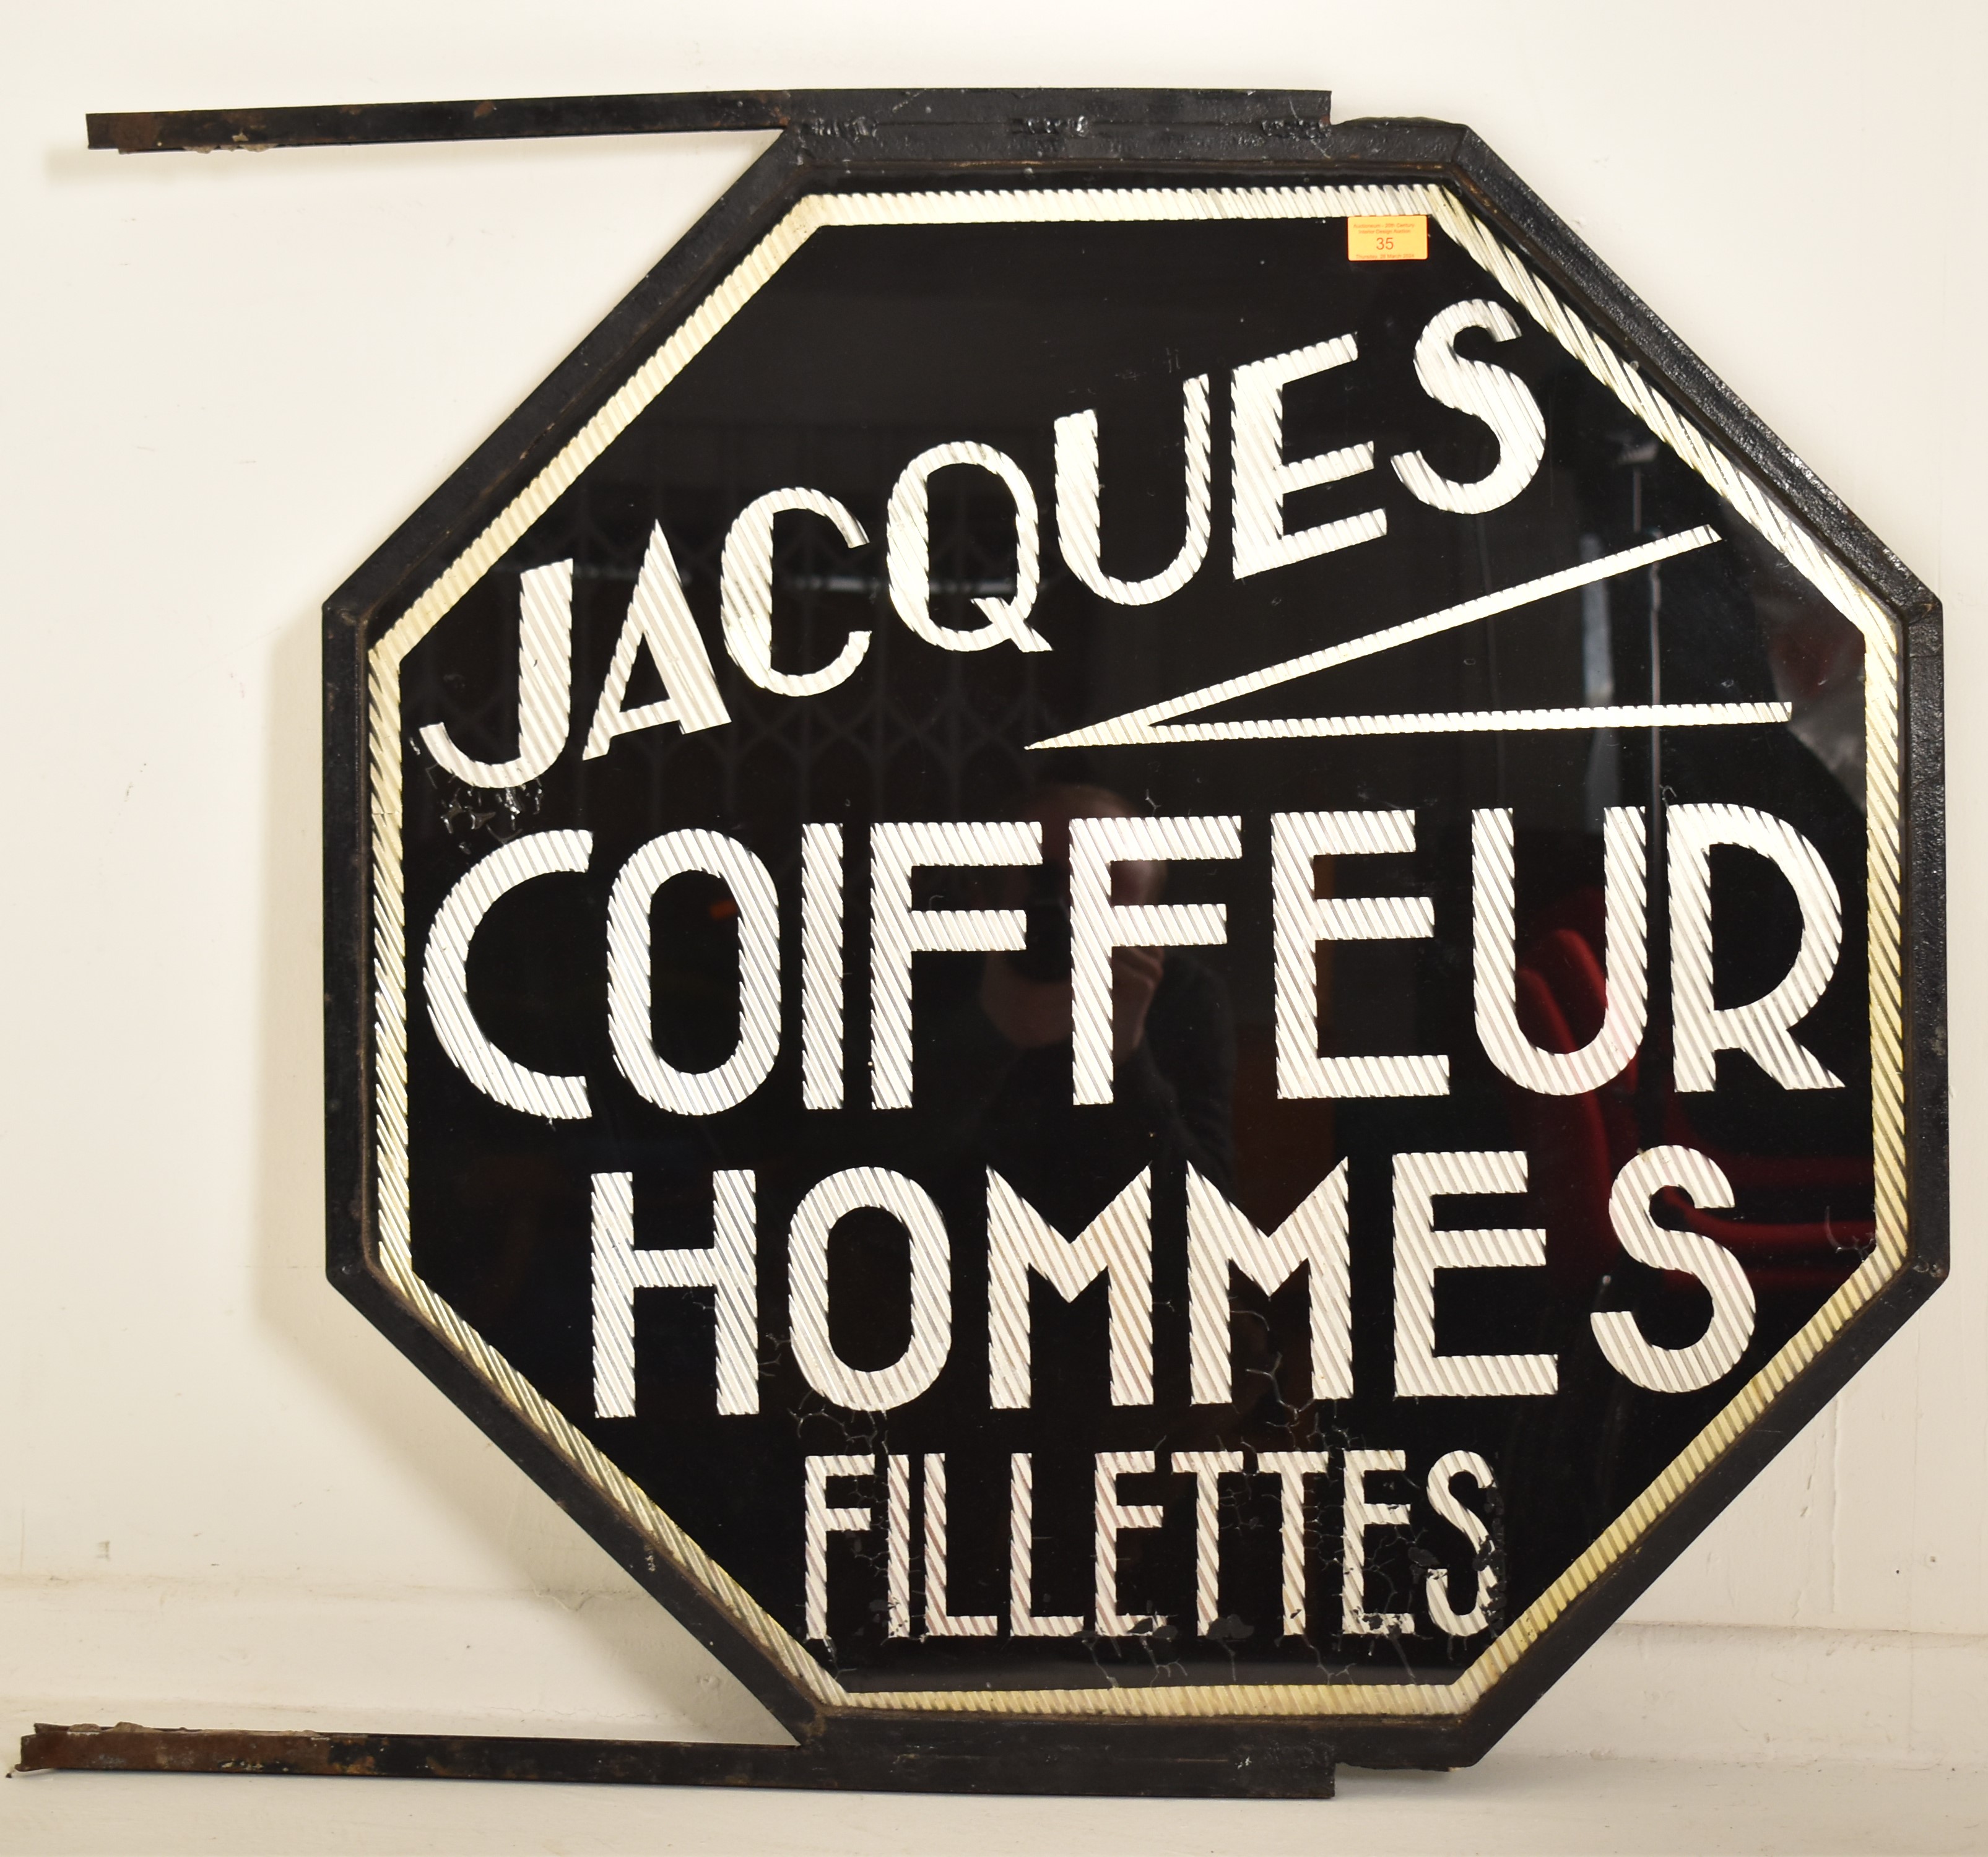 JACQUES COIFFEUR HOMMES FILLETTES - FRENCH GLASS SIGN